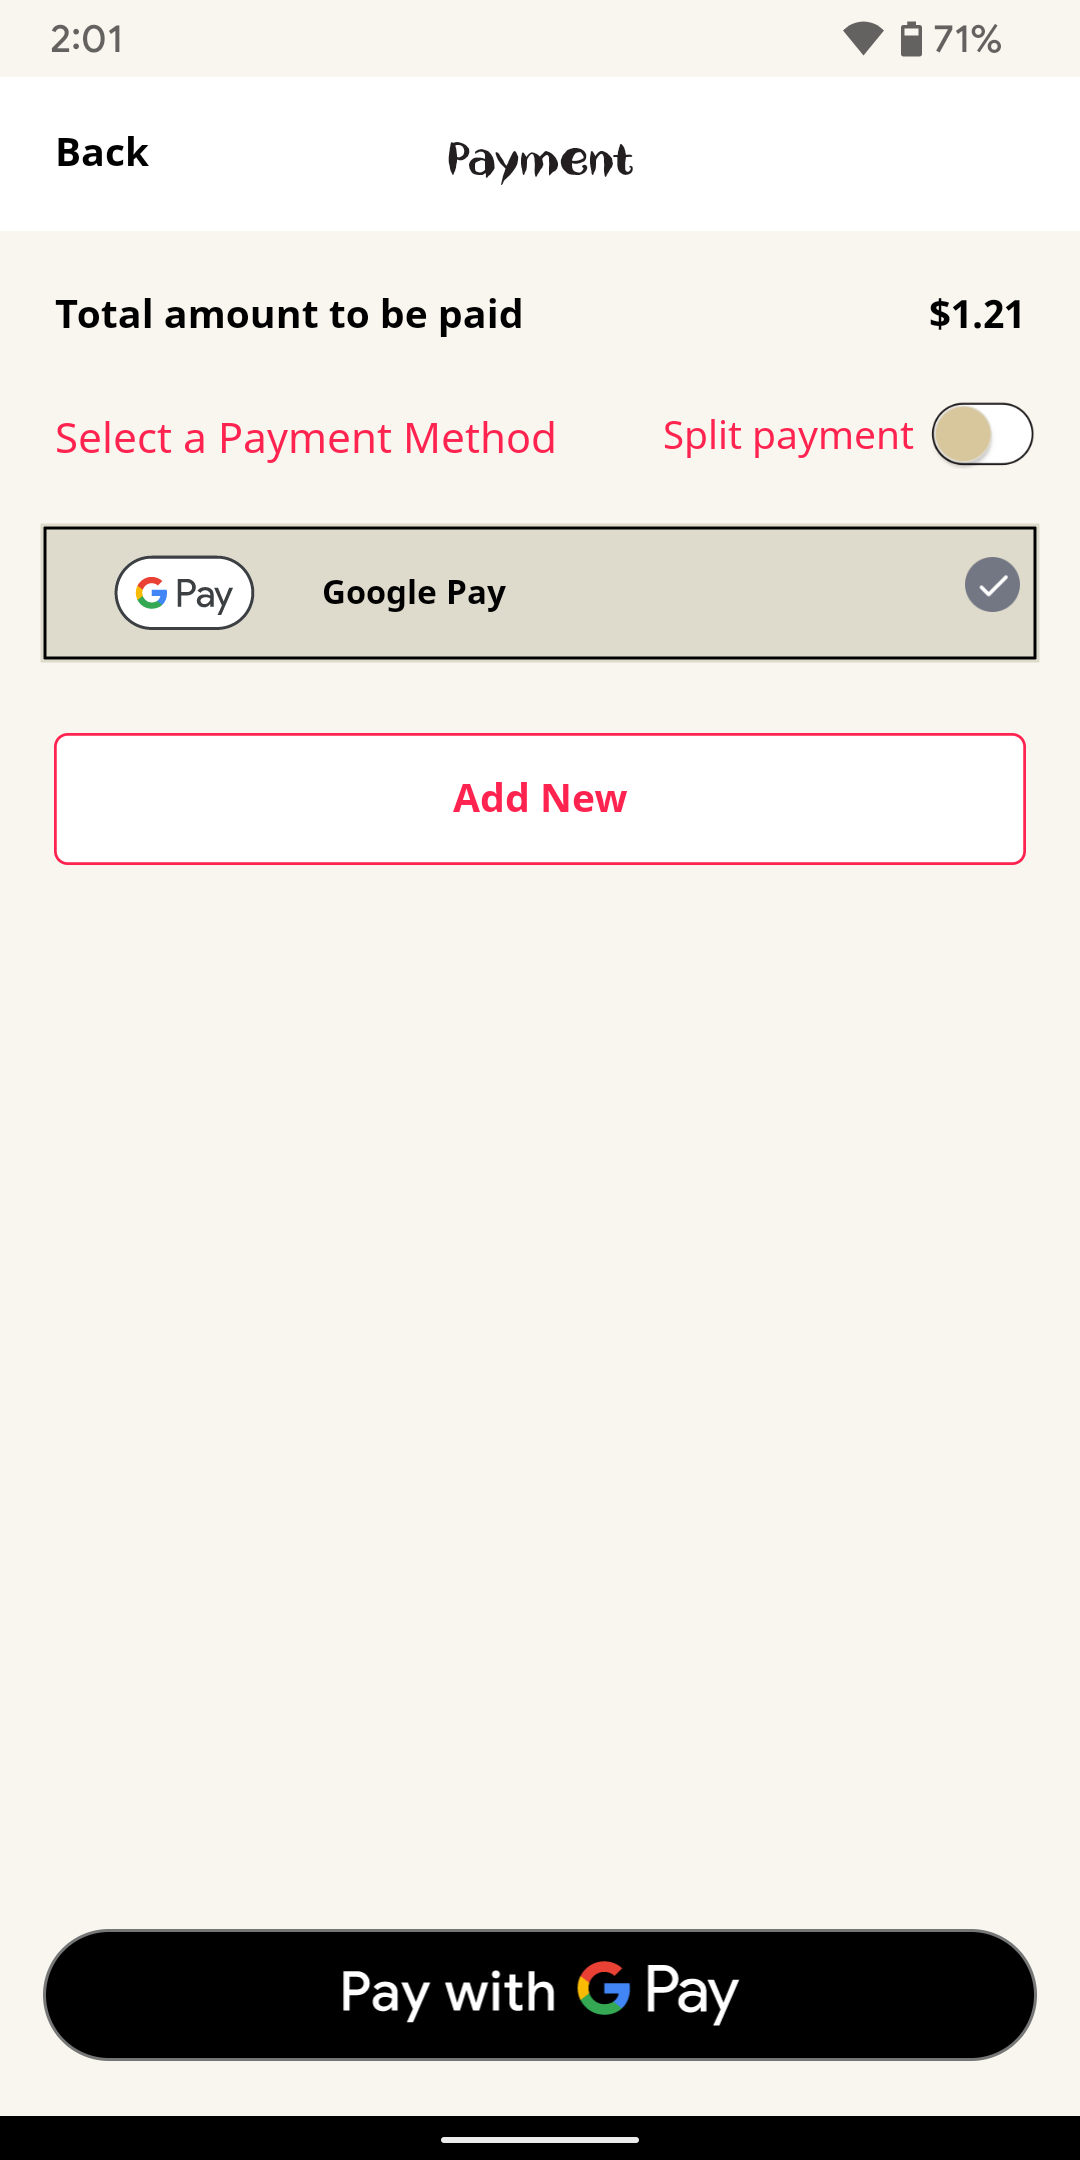 Nando's accepts Google Pay in its Android app.